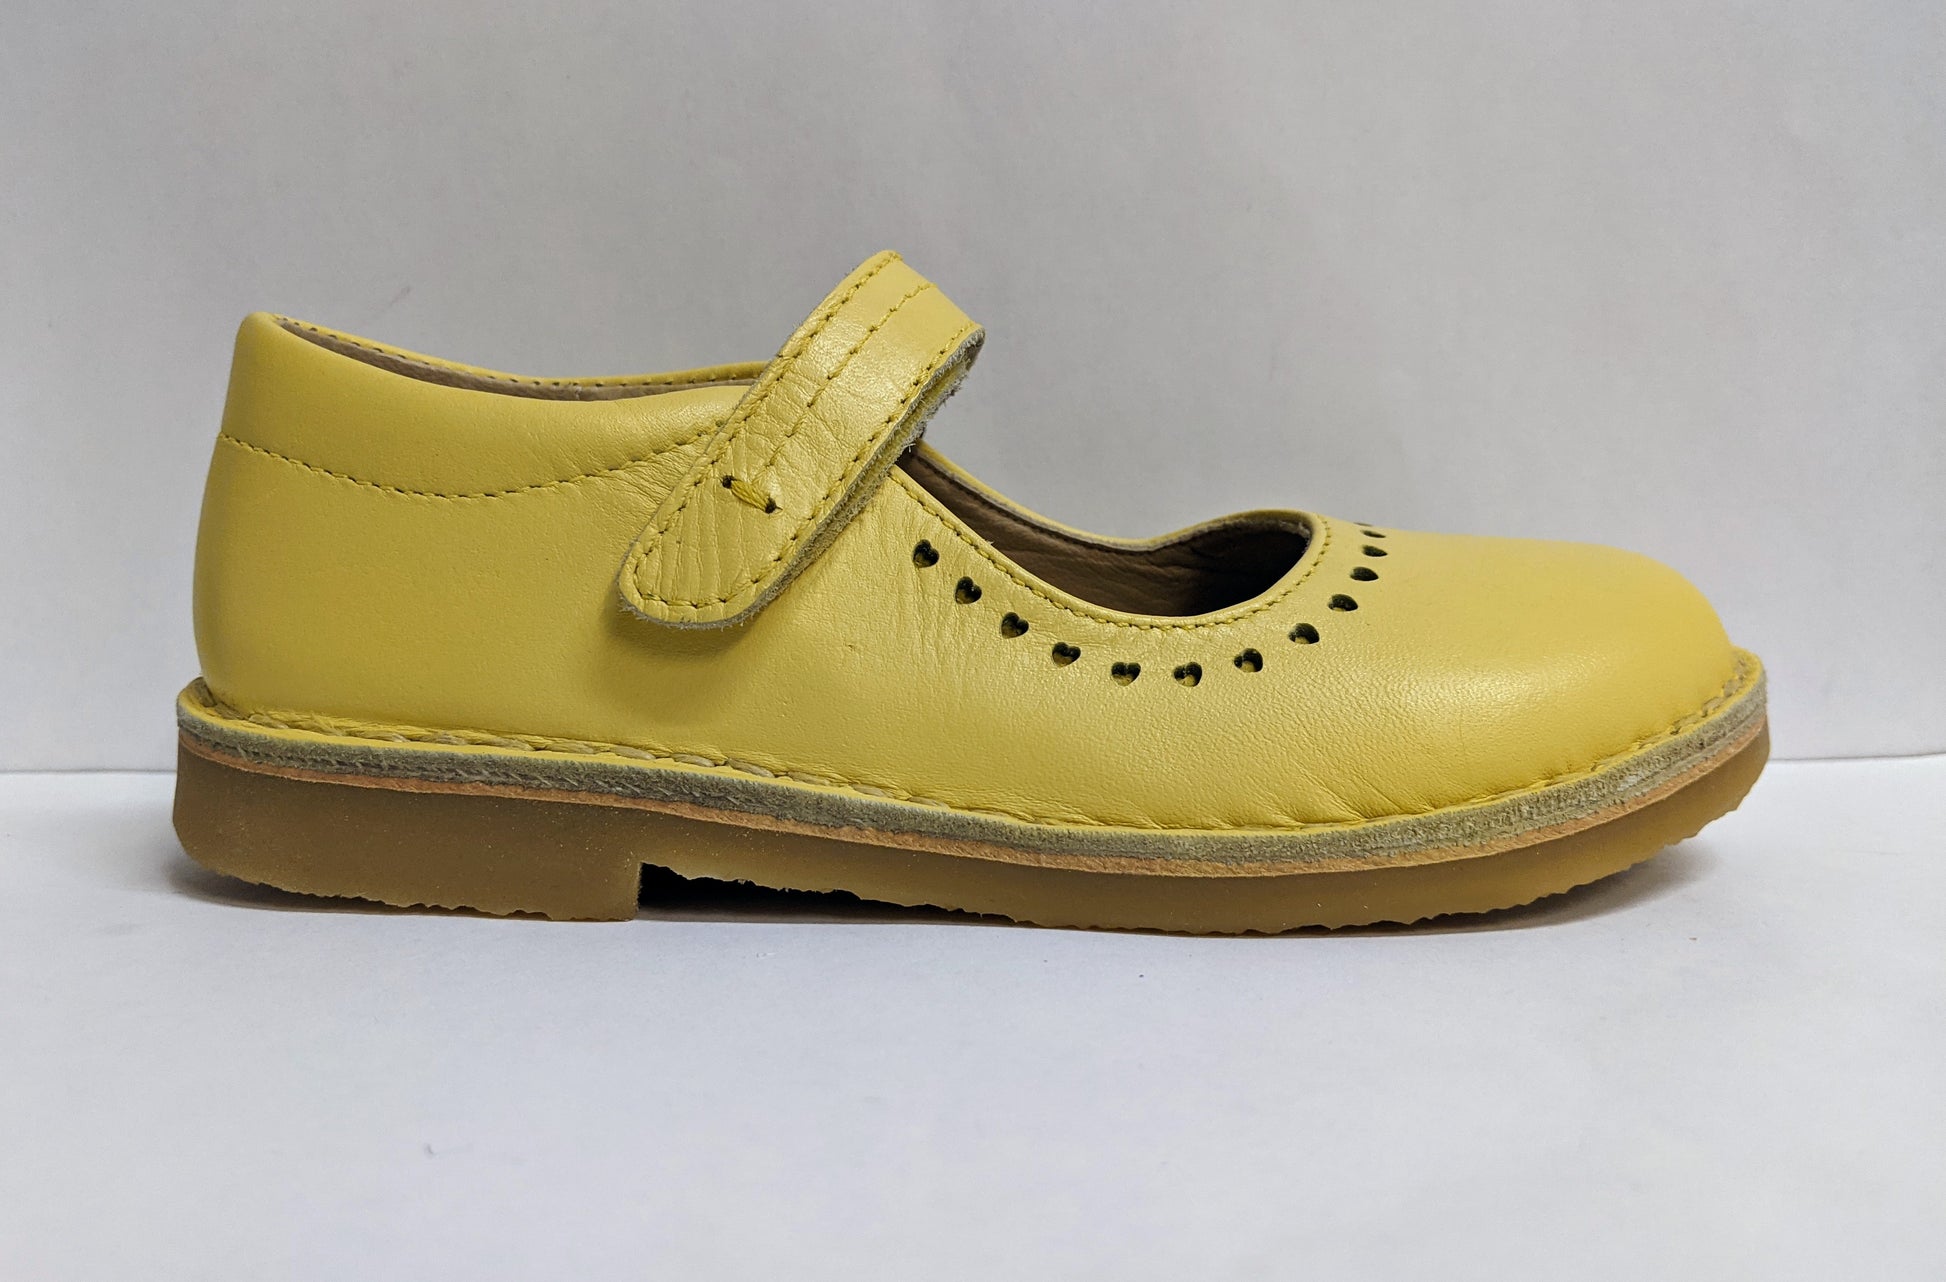 A girls Mary Jane shoe by Petasil,style Nadia, in yellow with velcro fastening. Right side view.